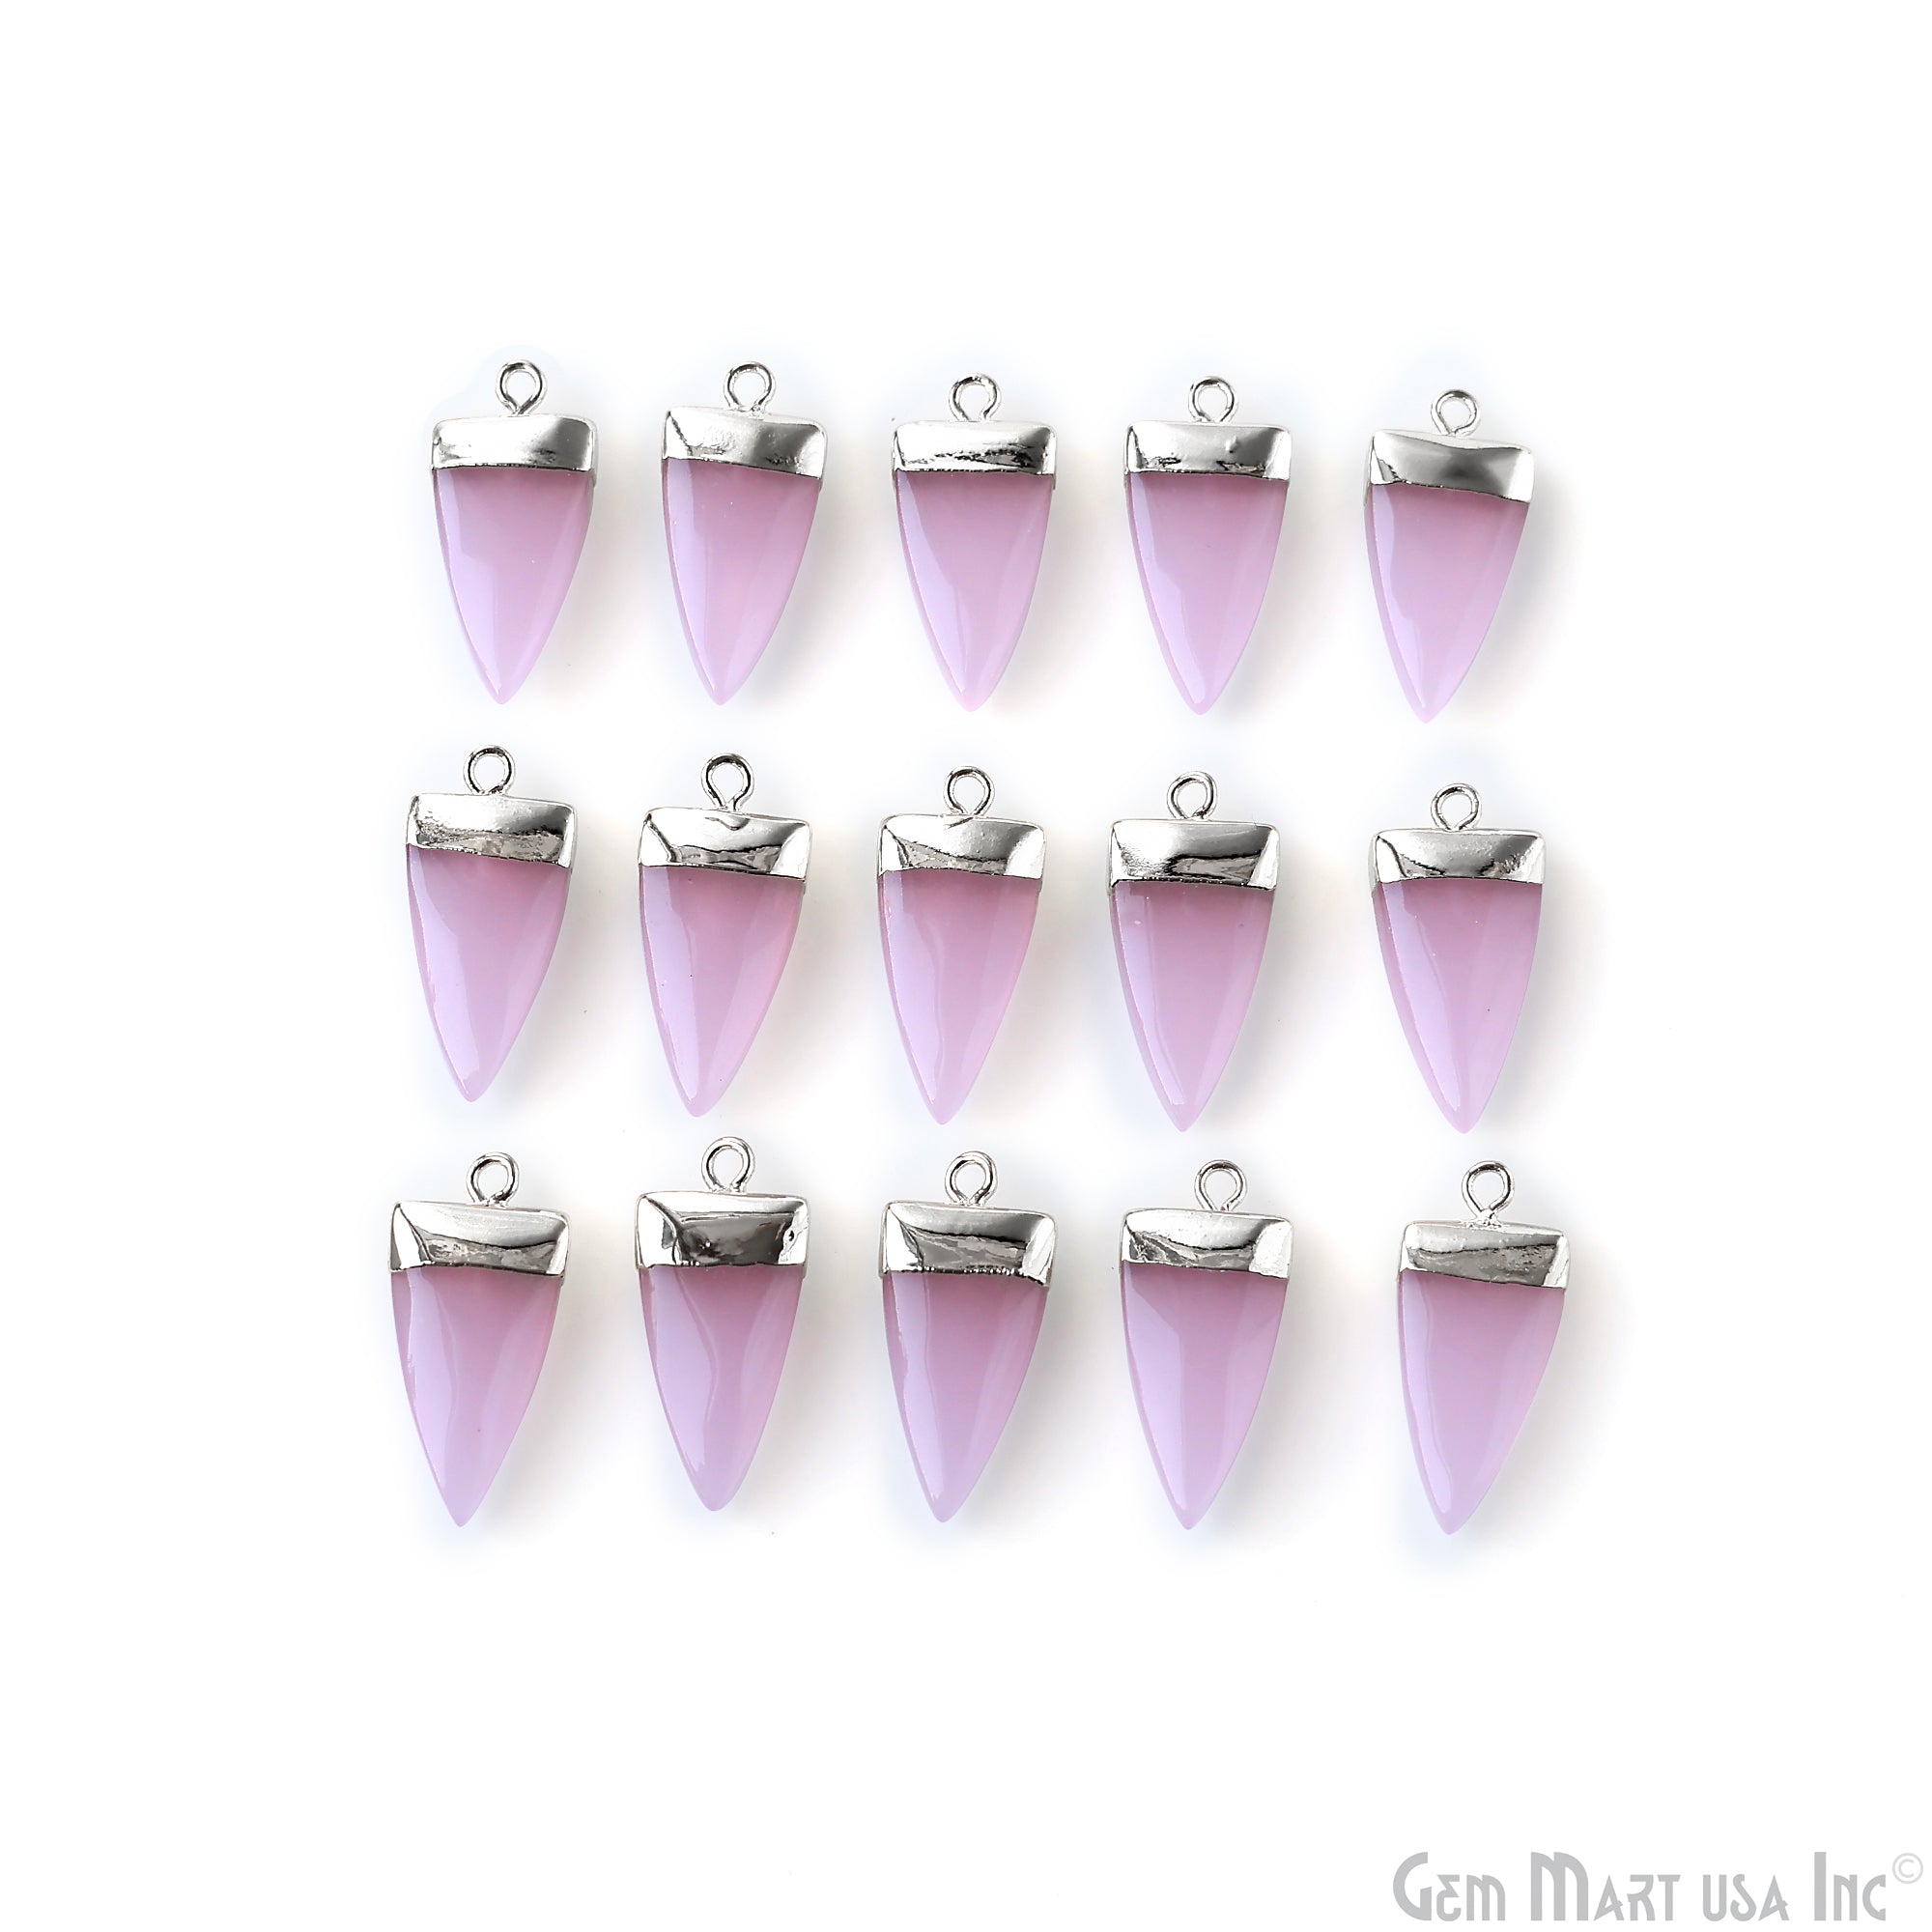 Gemstone Triangle 24x10mm Silver Electroplated Single Bail Connector